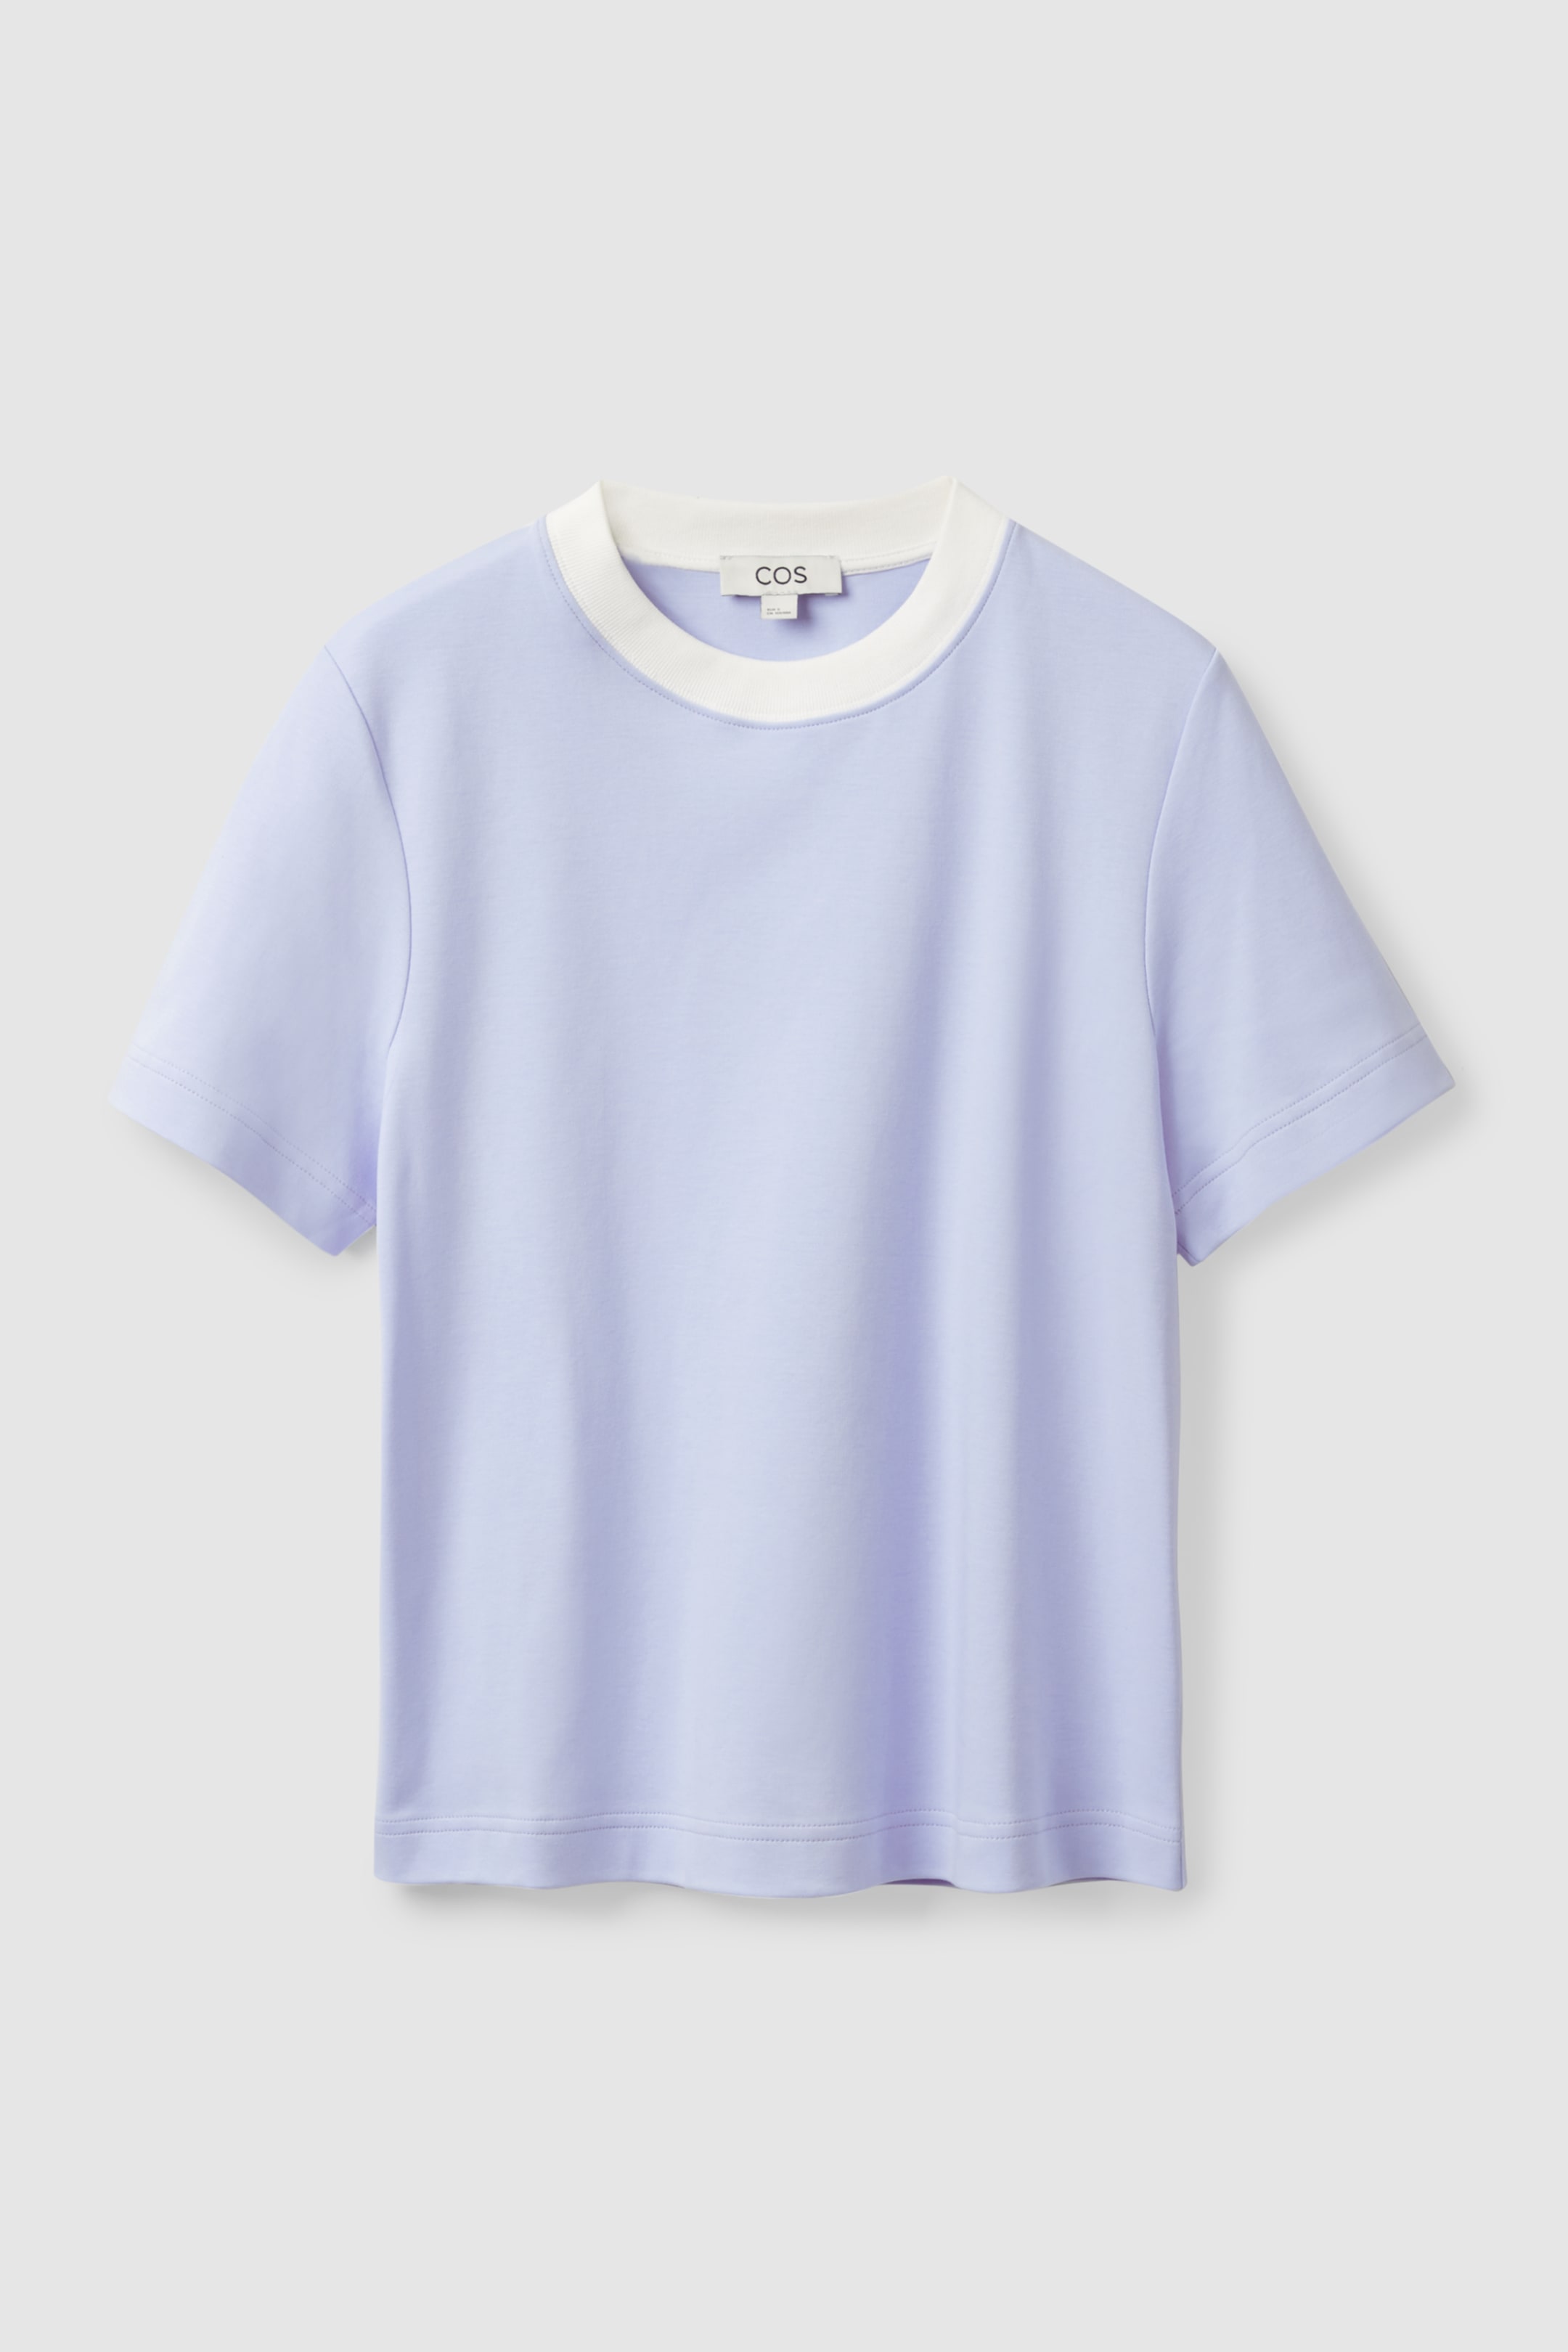 Front image of cos BOXY-FIT HEAVYWEIGHT T-SHIRT in LIGHT BLUE